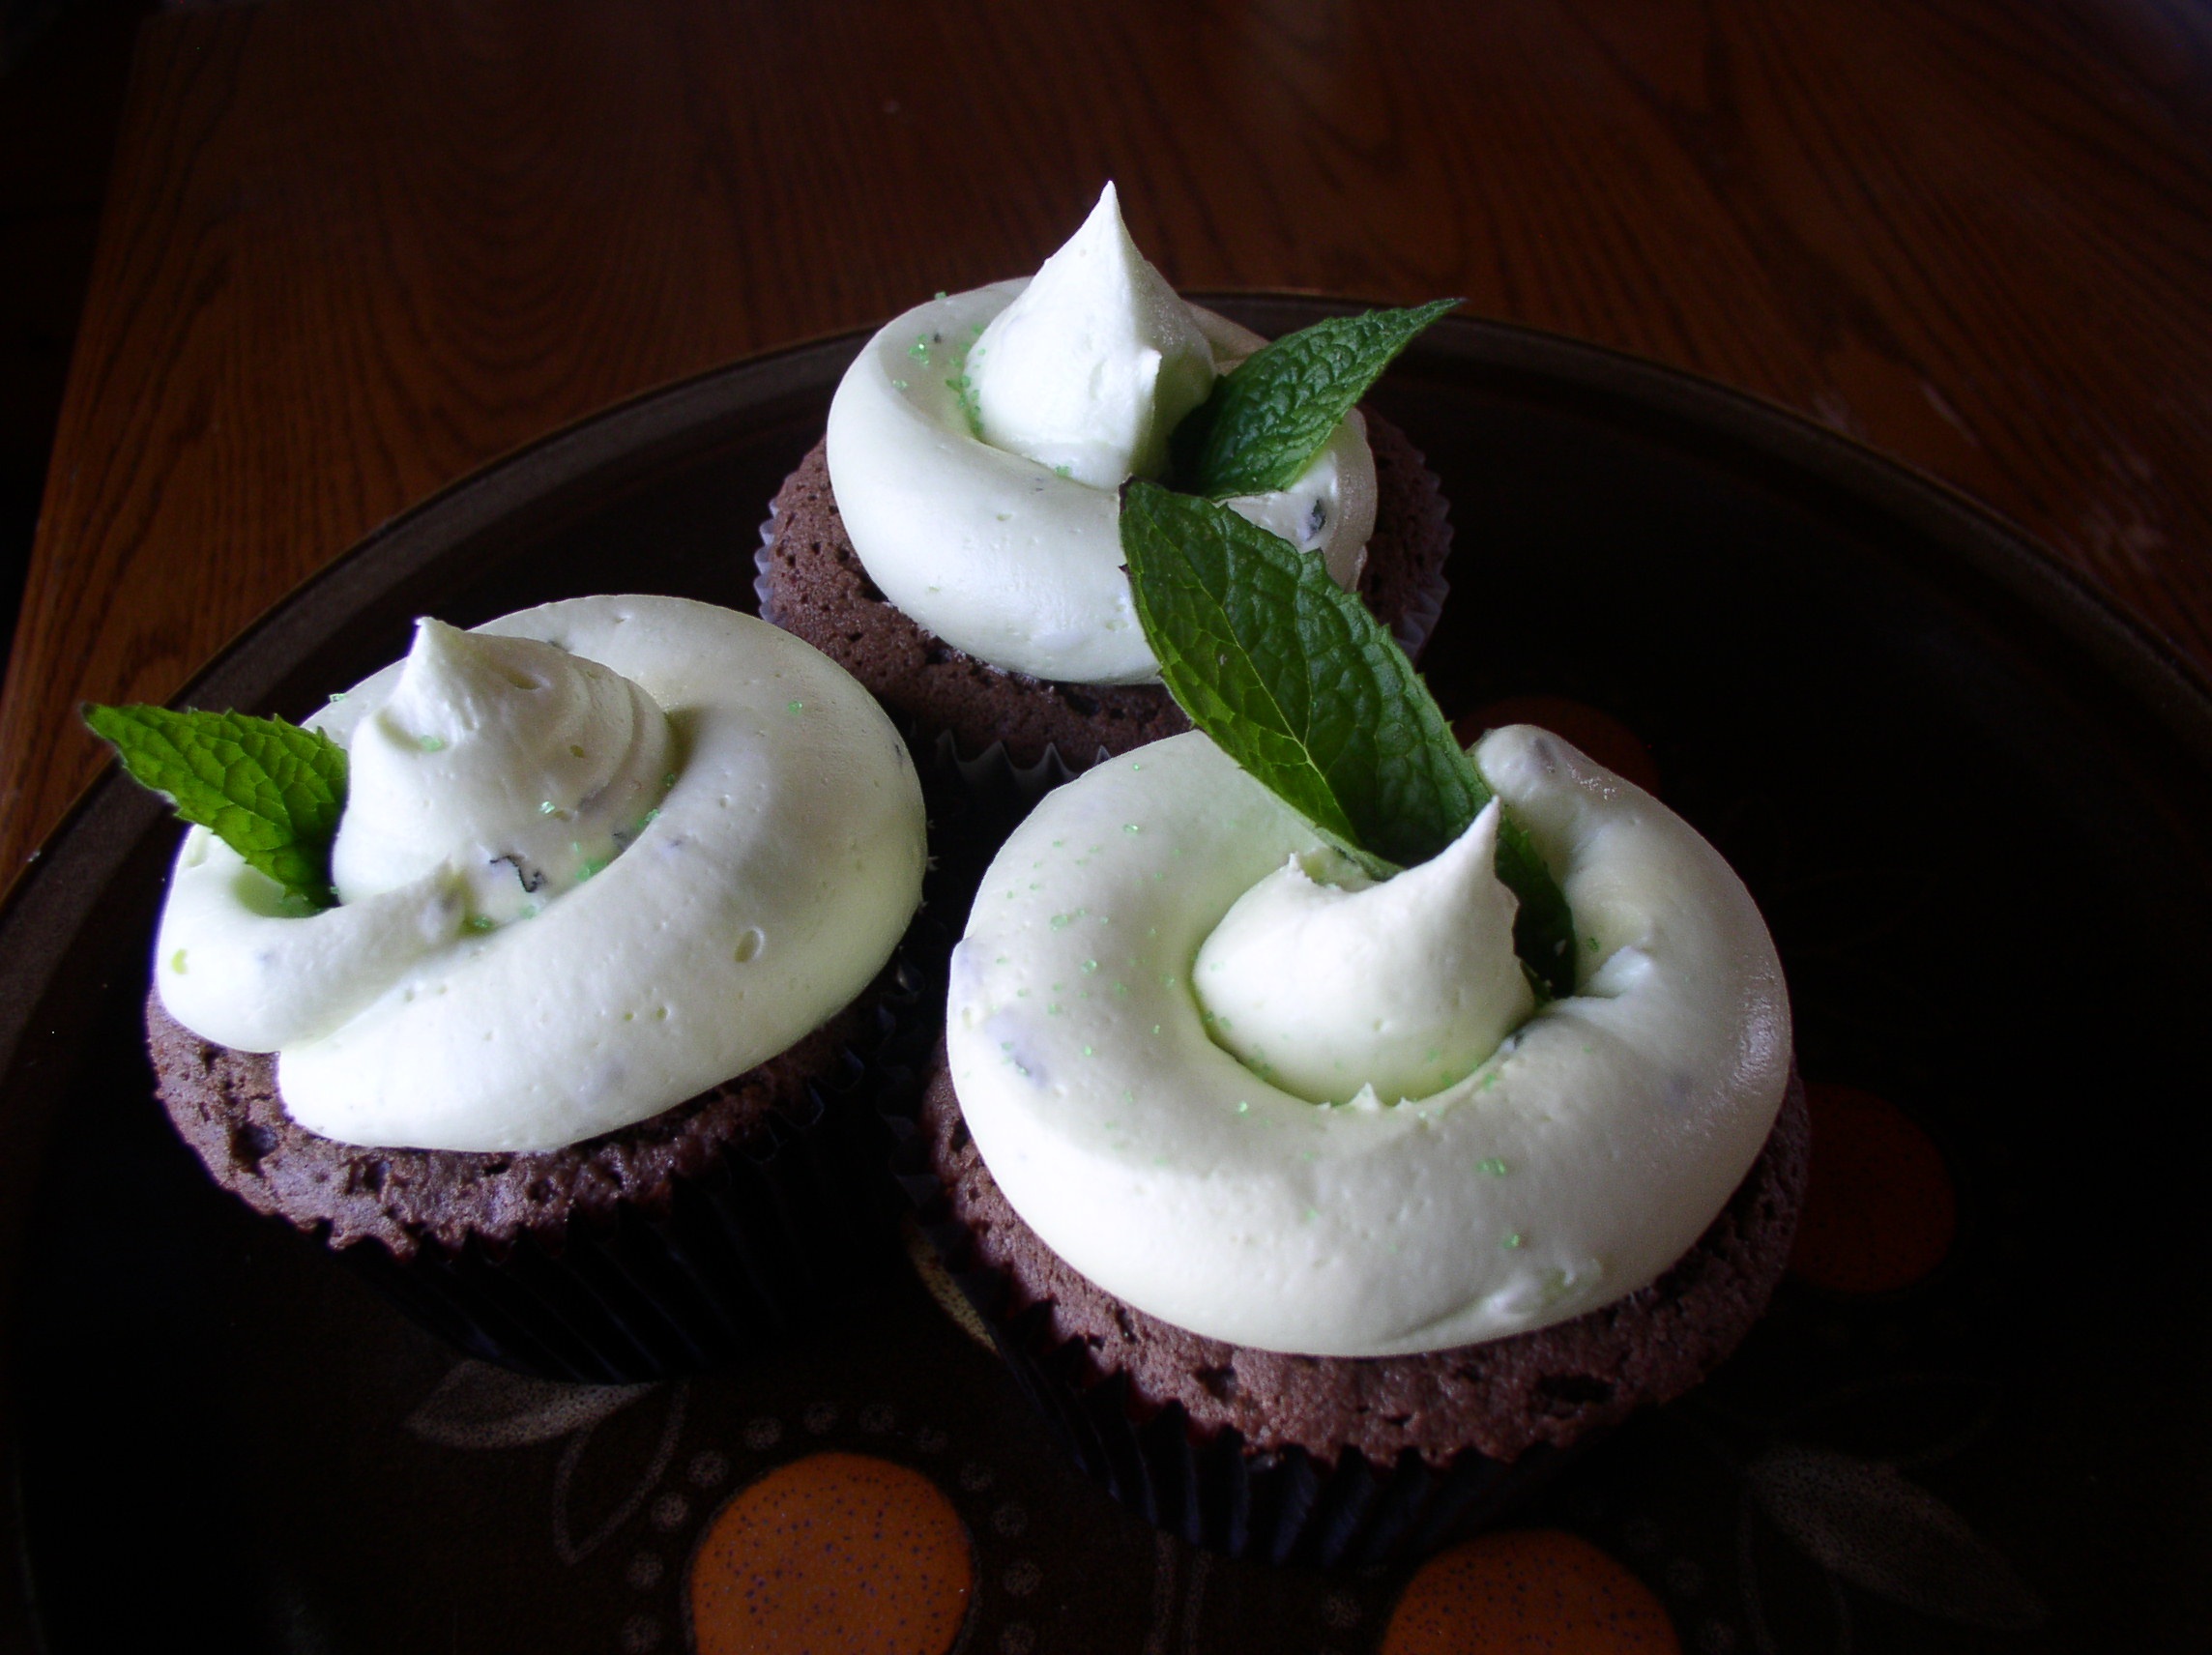 Mint flavored cupcakes photo